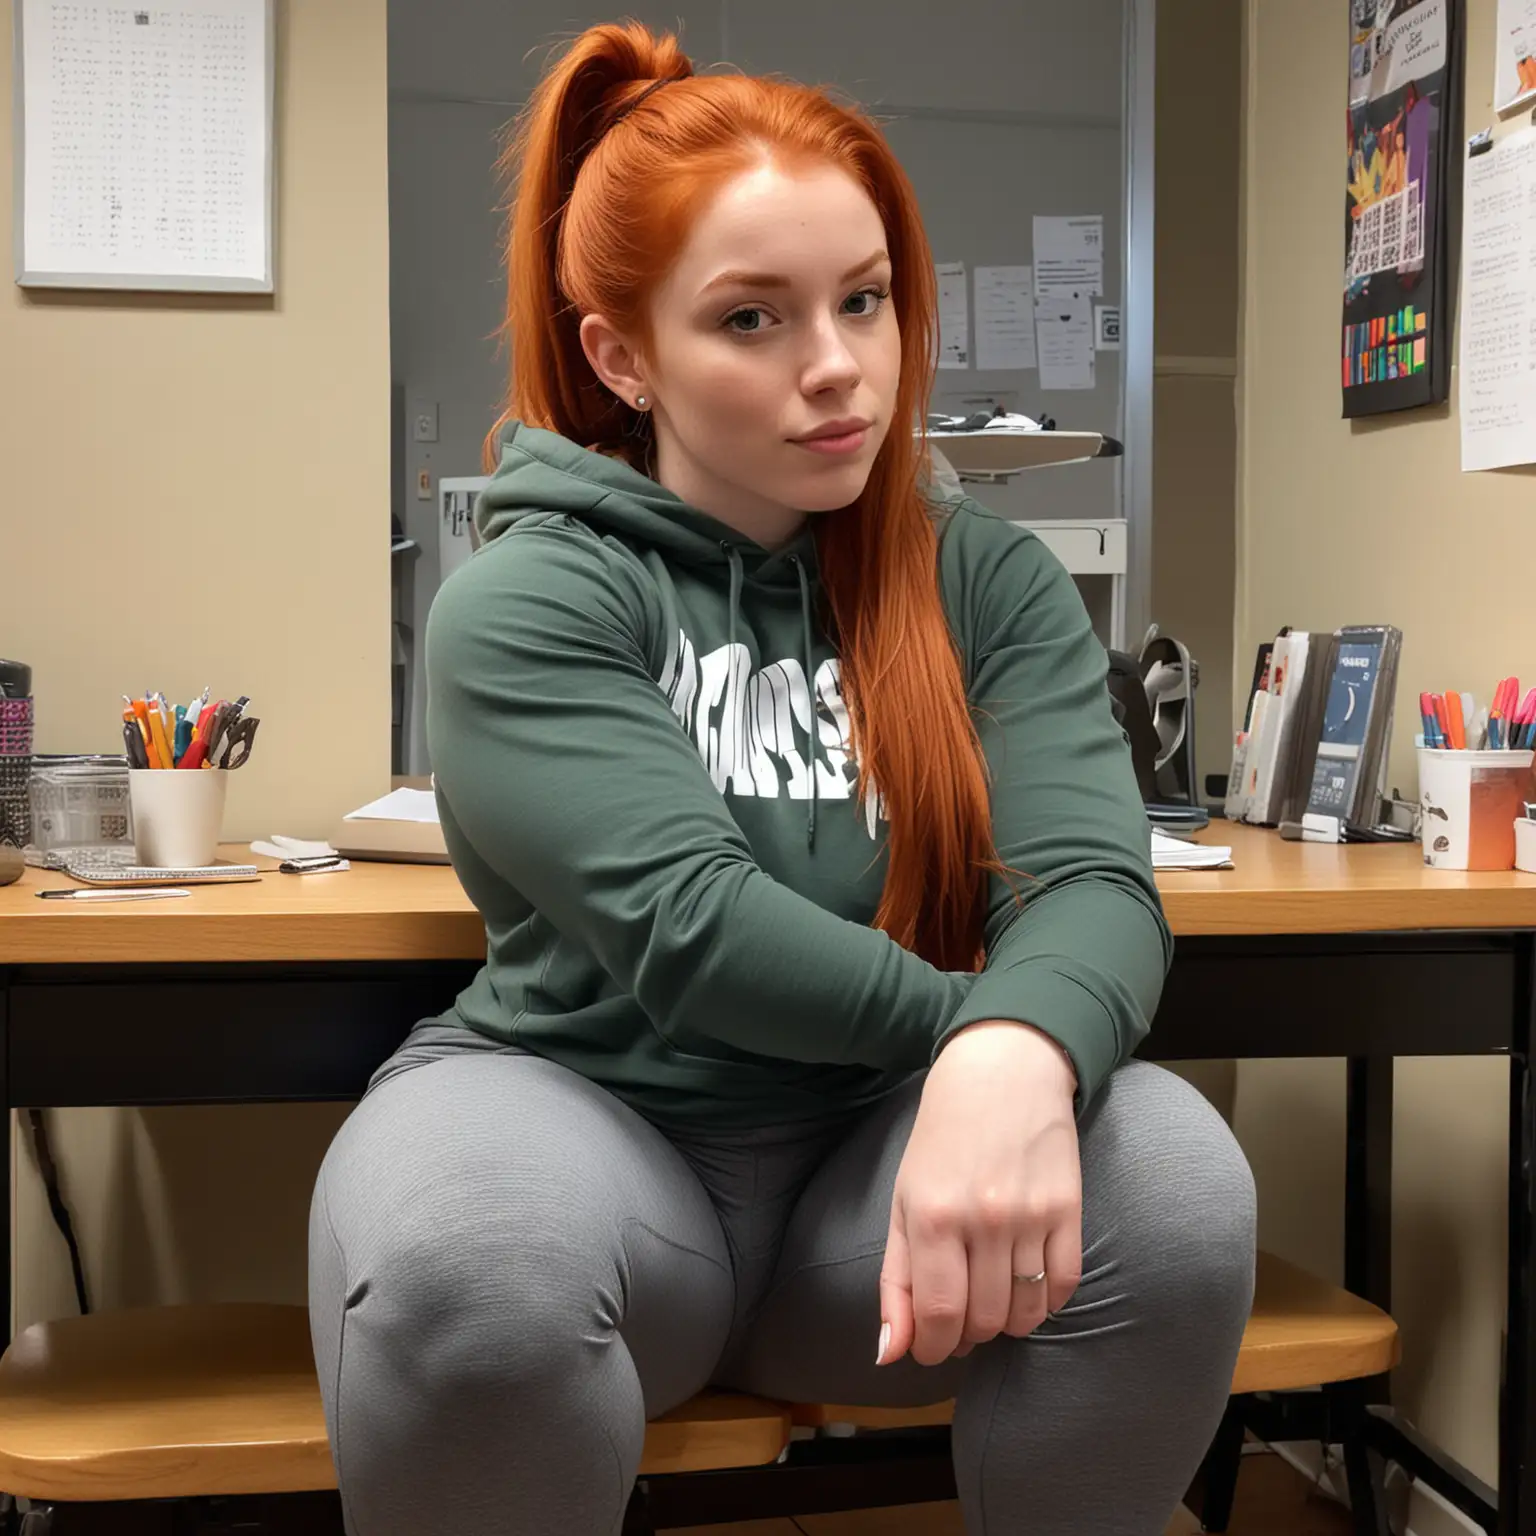 Redheaded Muscle Girl in Tight Leggings and Hoodie at Desk